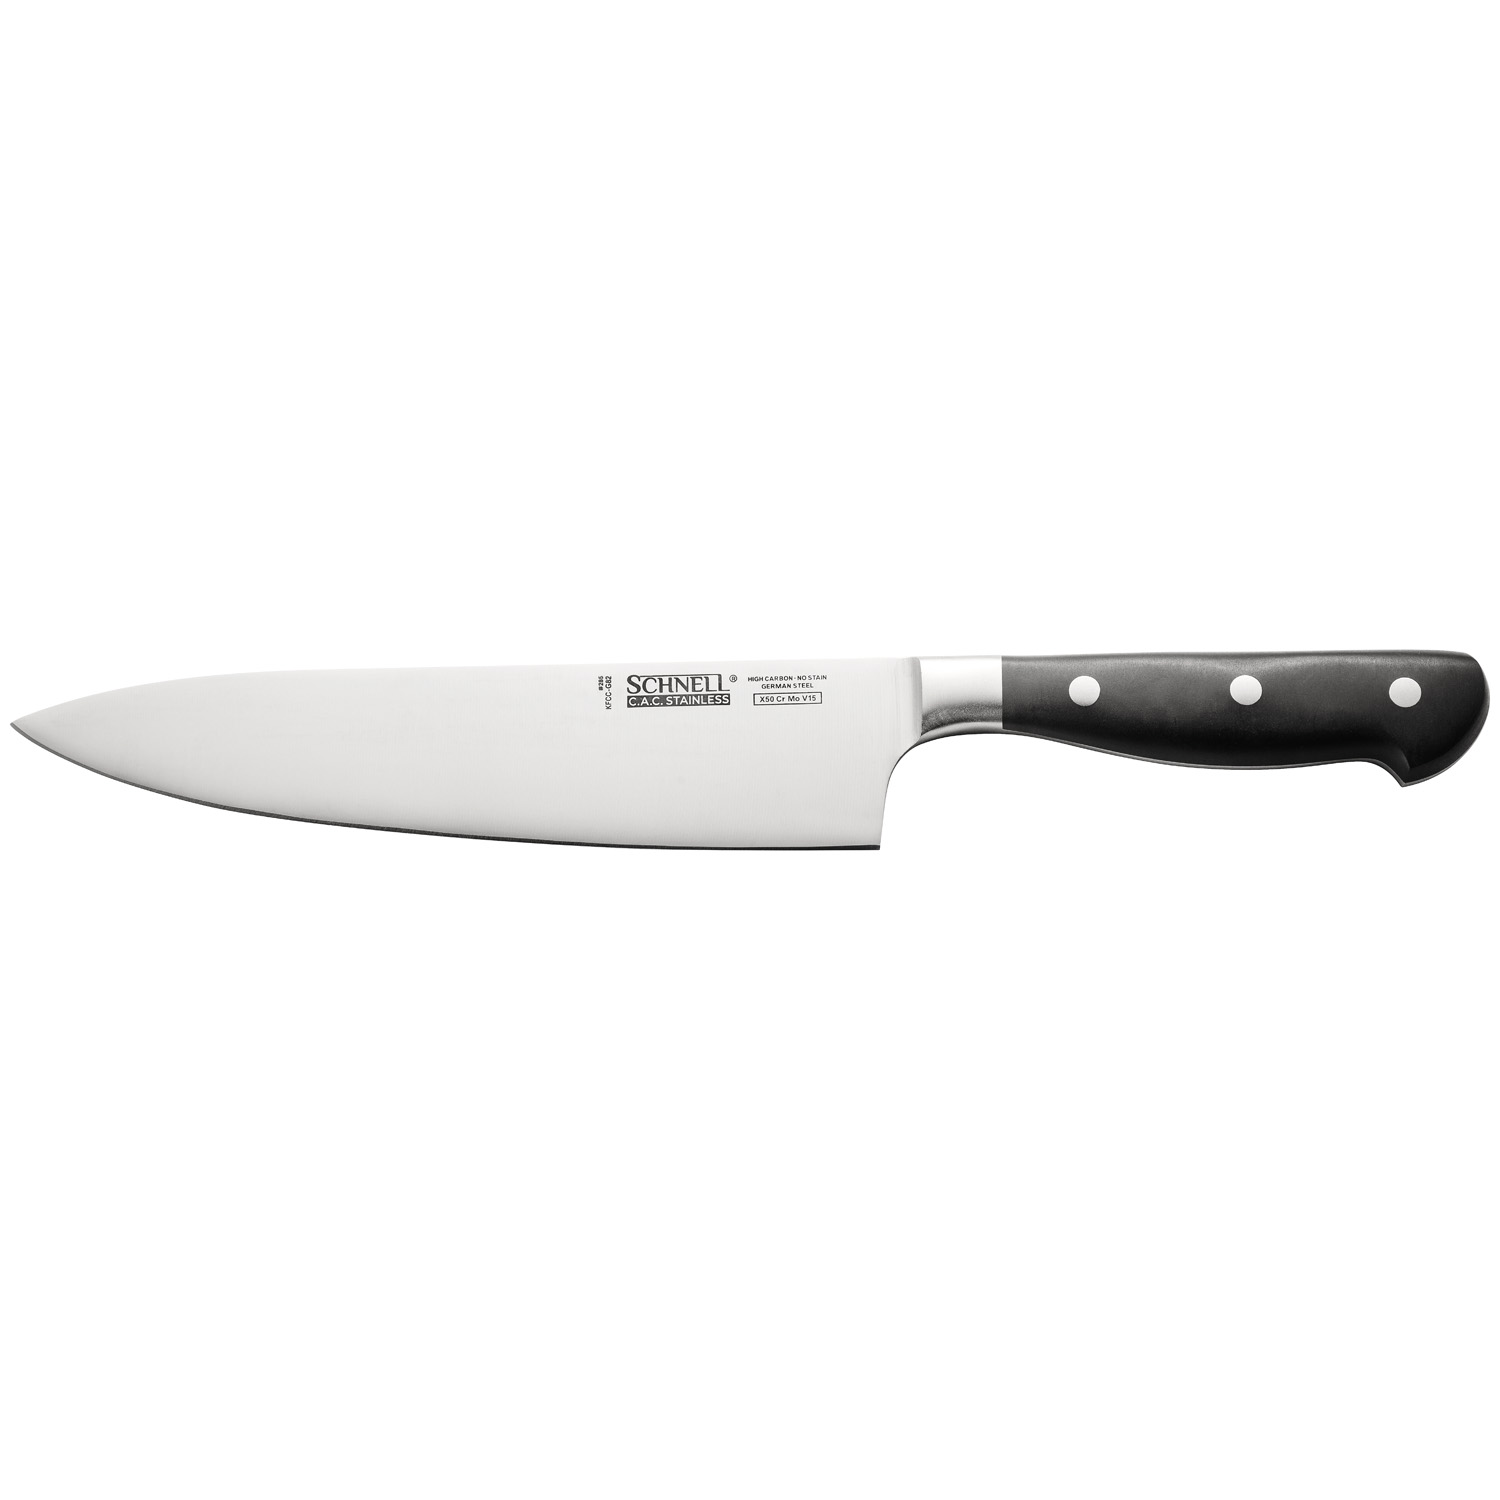 CAC China KFCC-G82 Schnell Forged Short Bolster Chef Knife 8"